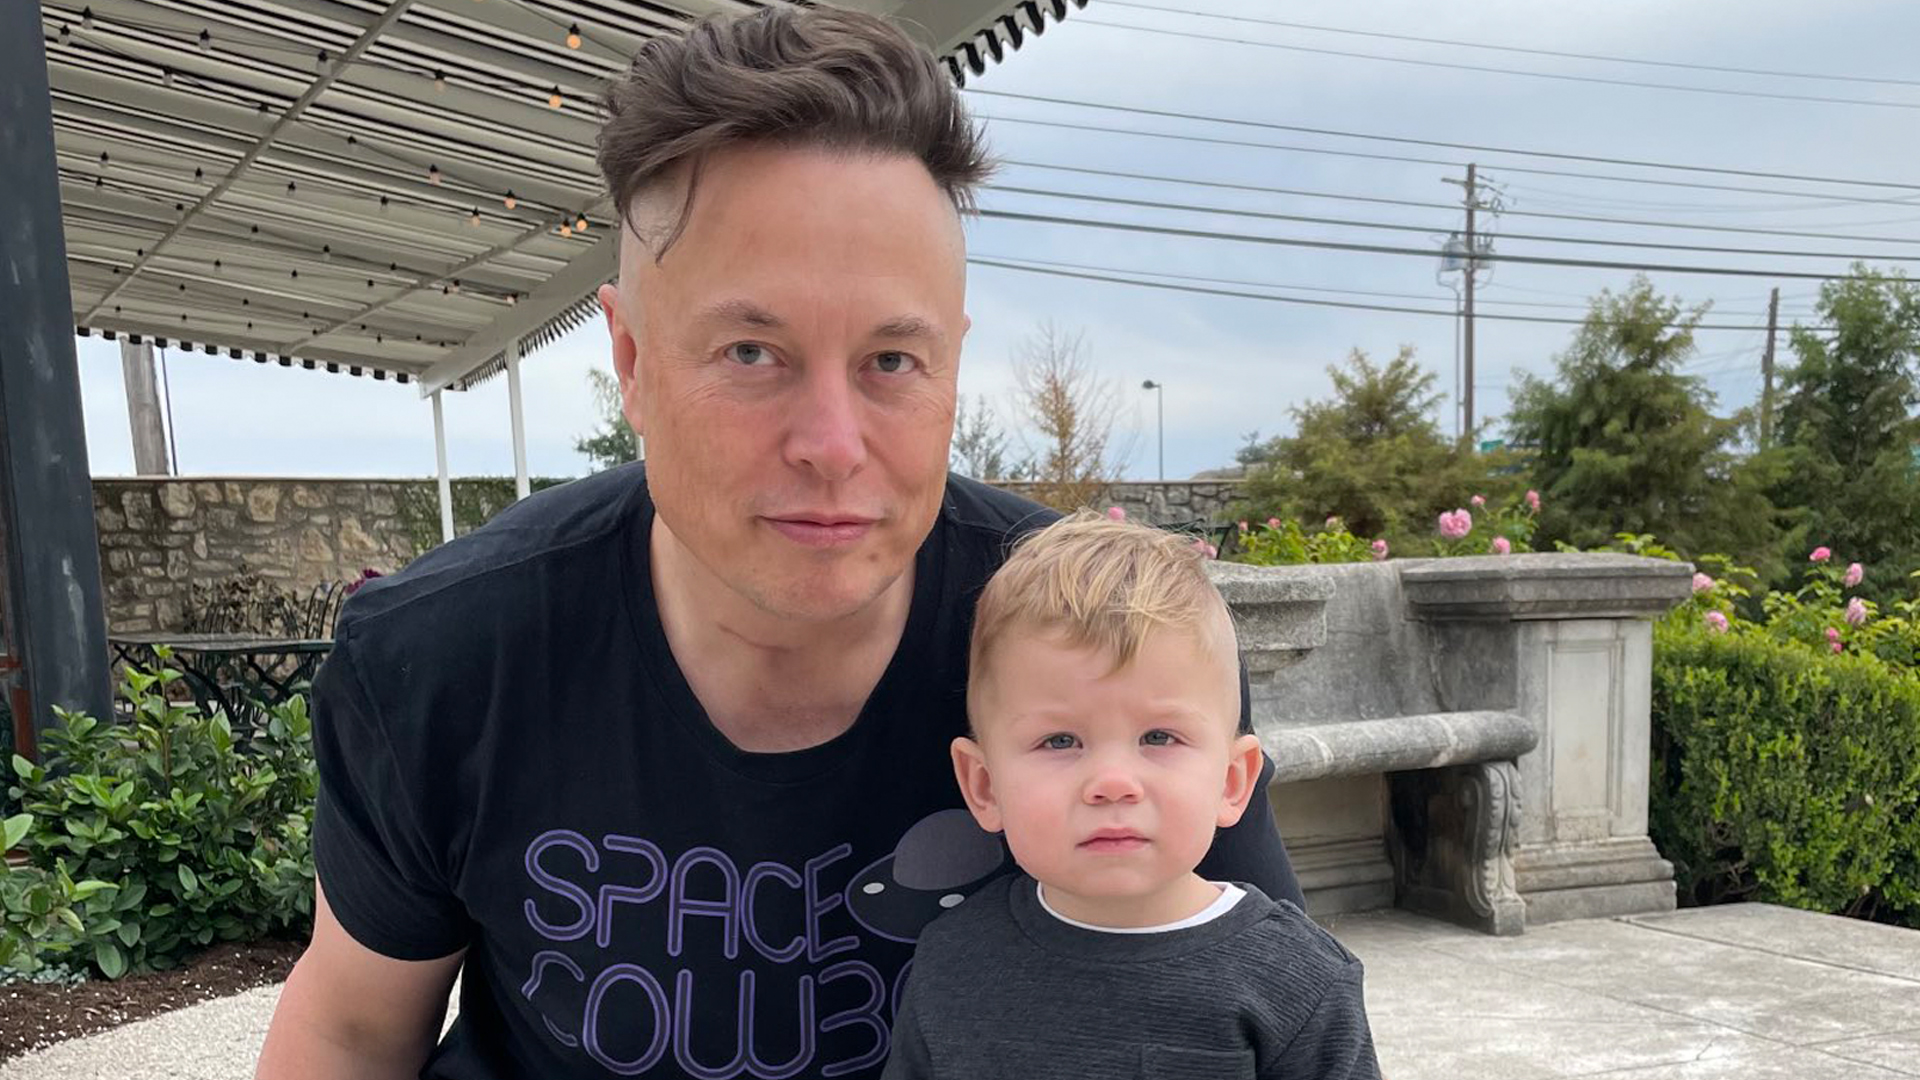 Elon Musk shared rare photo with his lookalike son, X AEA-XII. They have identical haircuts